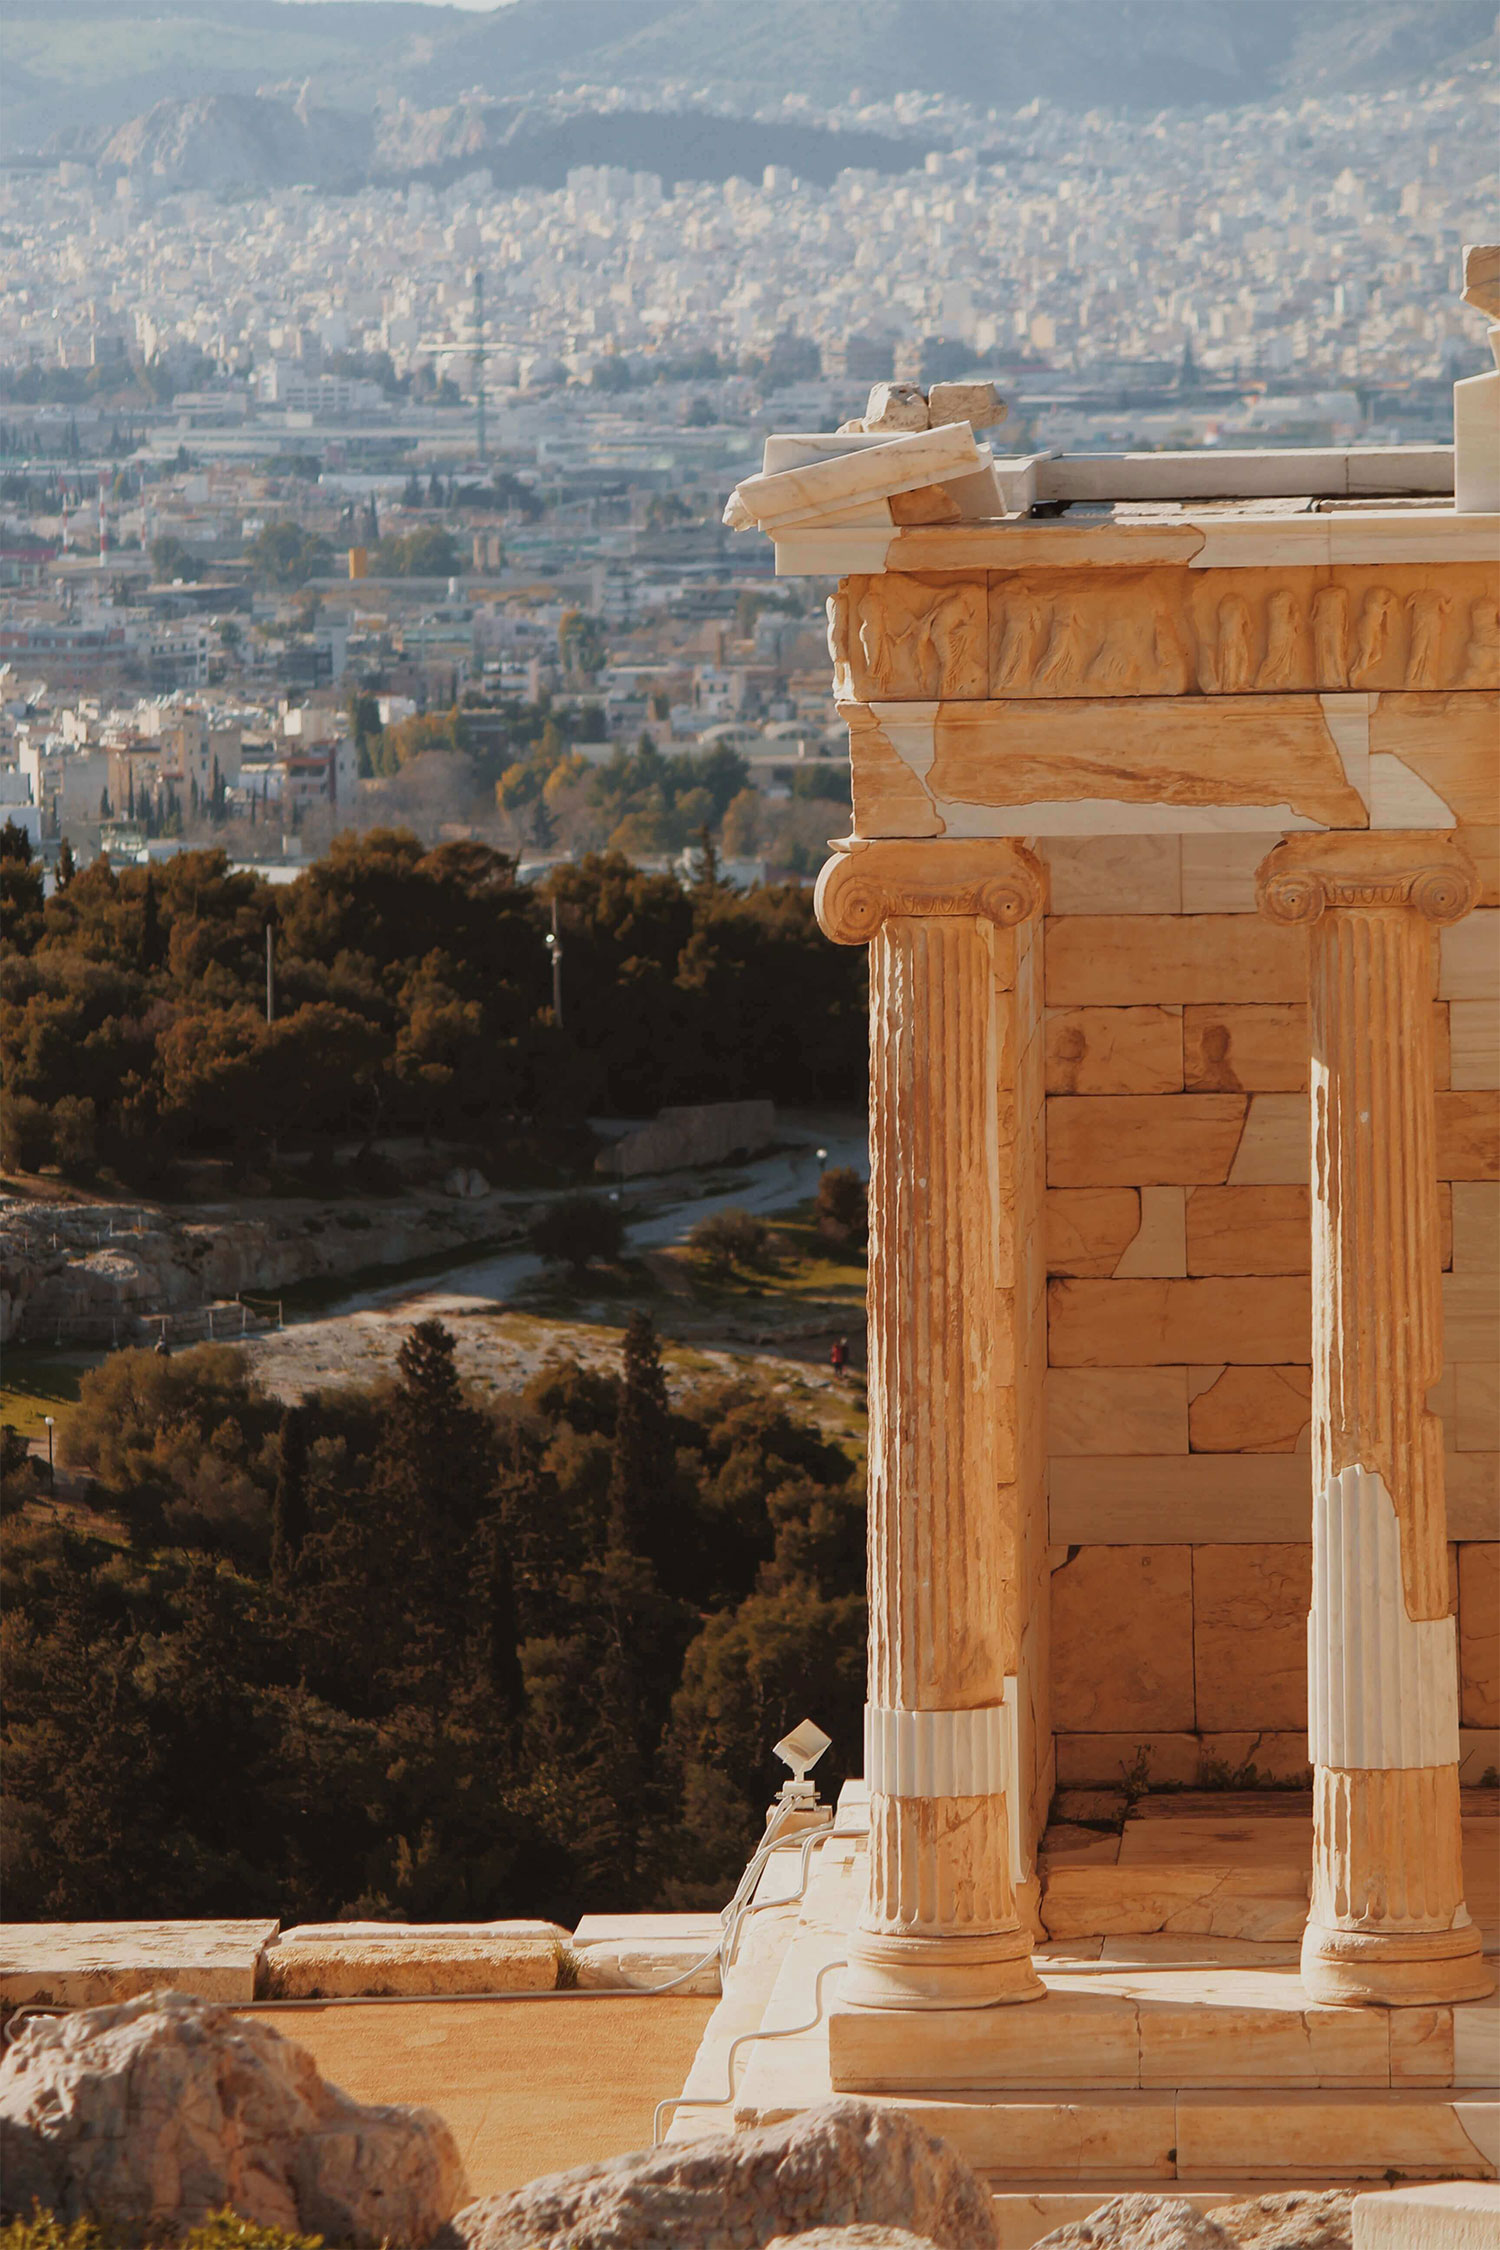 Acropolis- Overseeing the largest Greek city of Athens 7